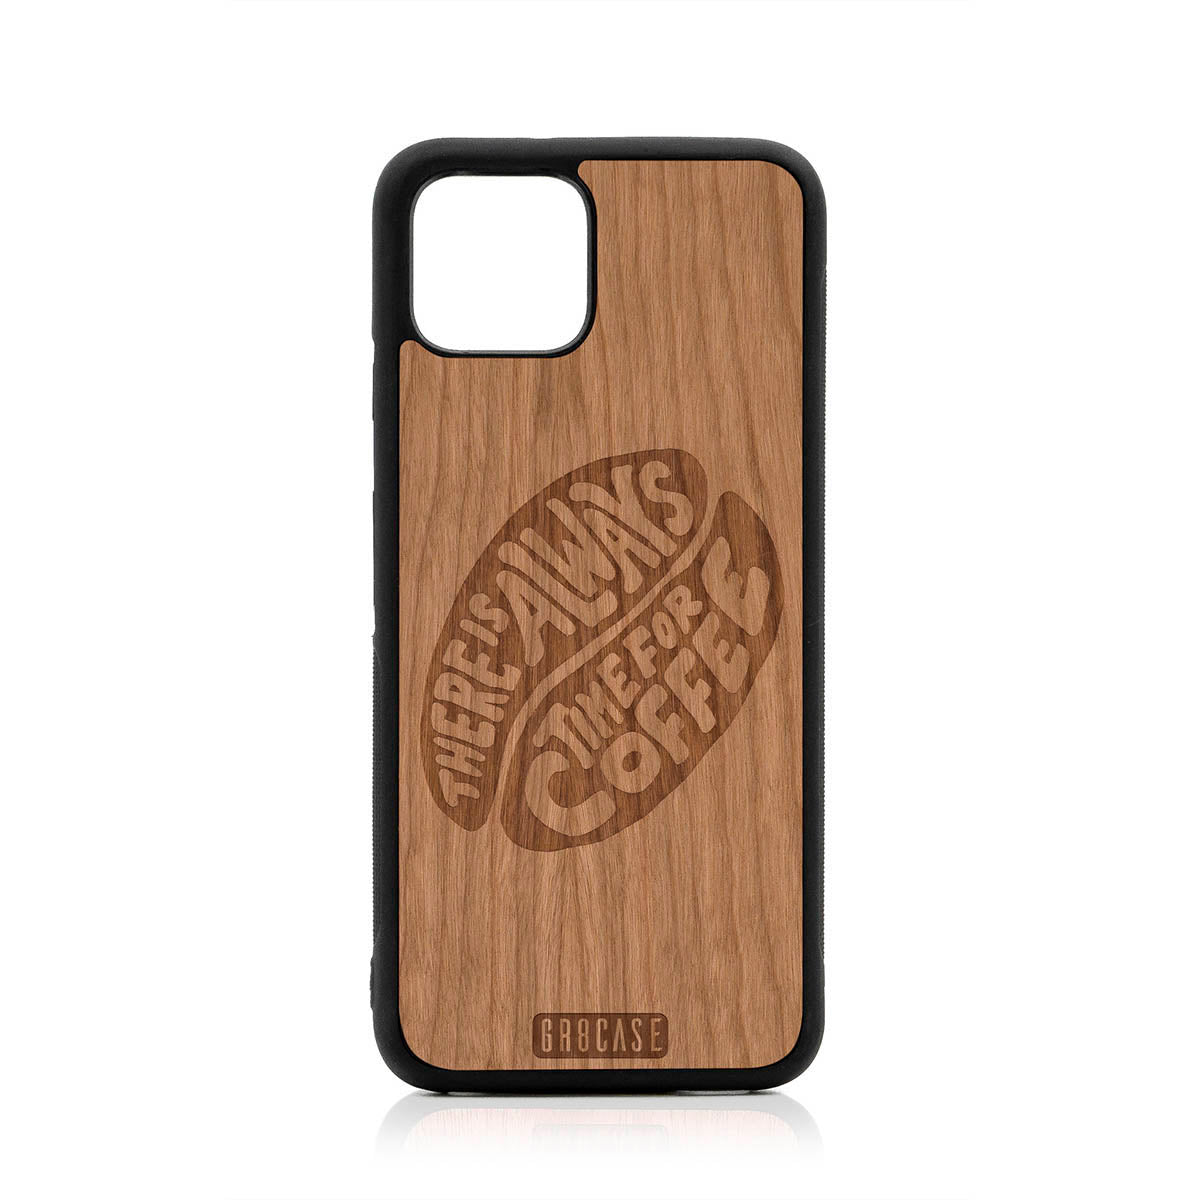 There Is Always Time For Coffee Design Wood Case For Google Pixel 4